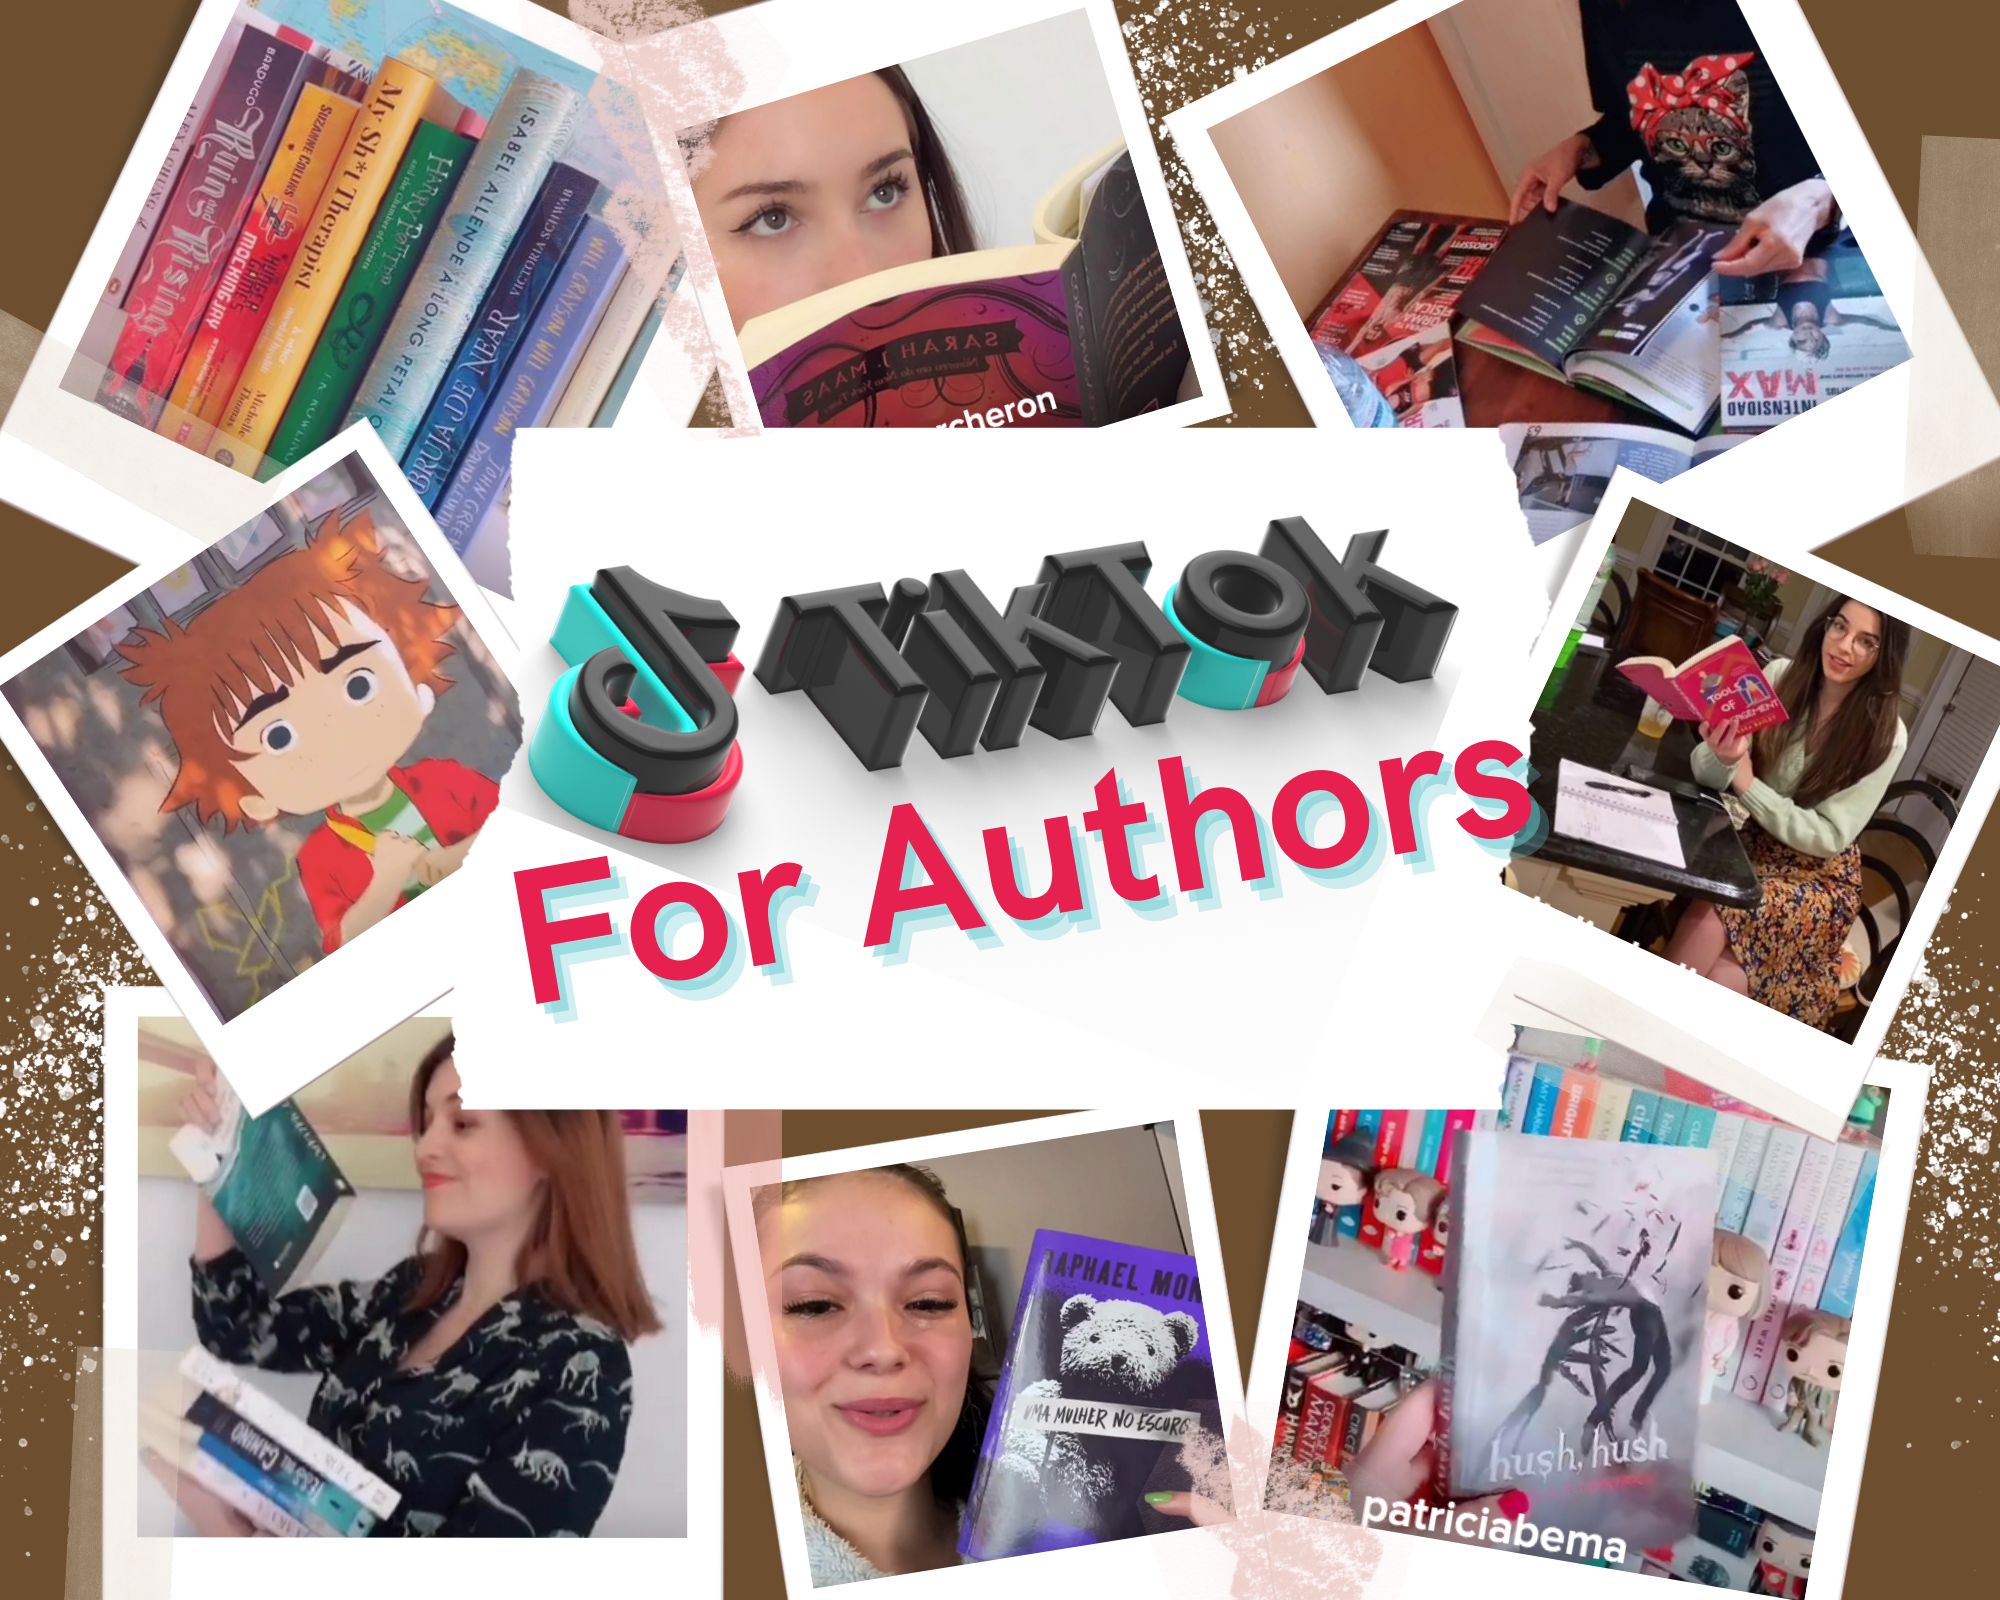 tiktok training course for authors and writers